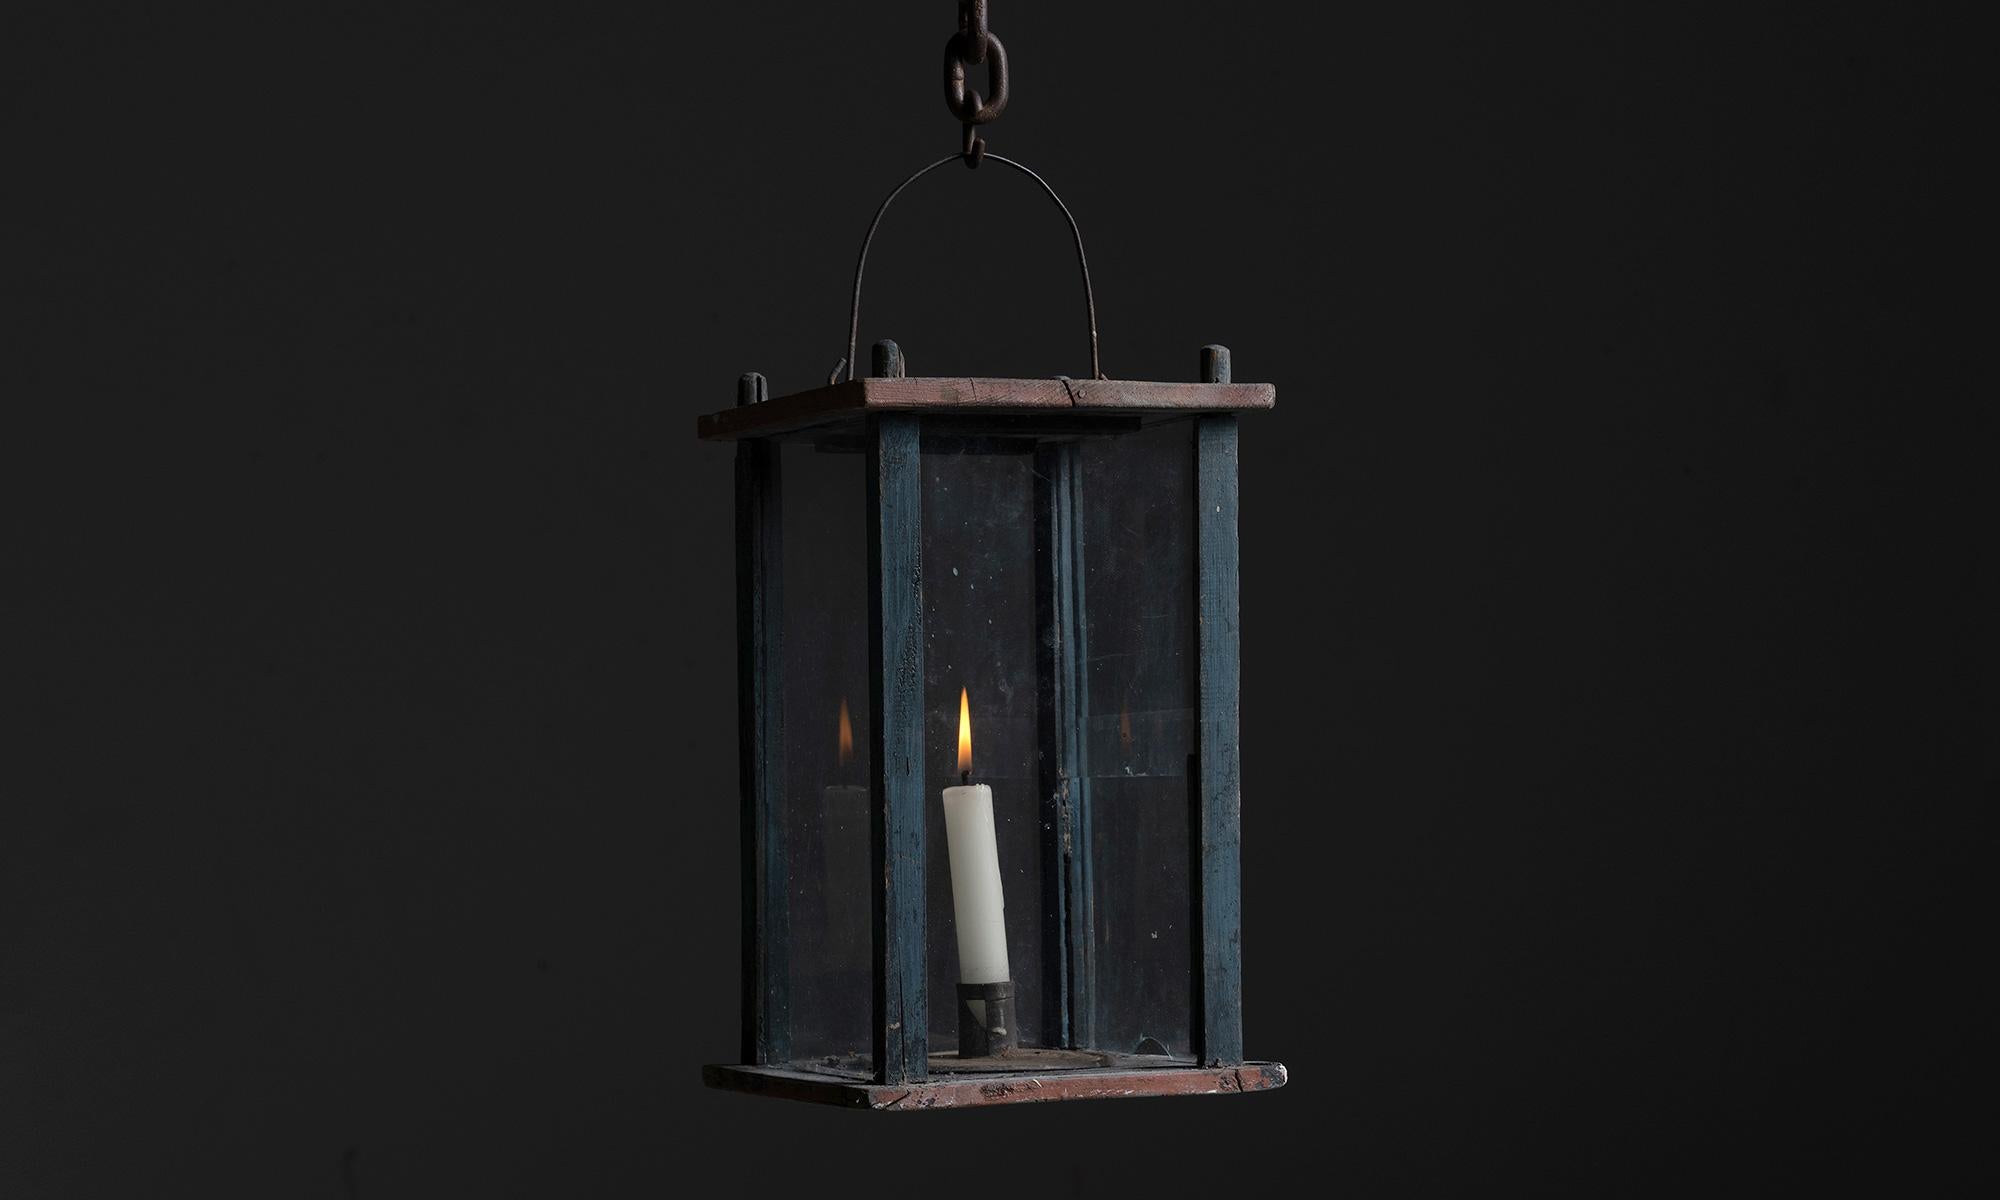 Painted wood & glass lantern

Sweden, circa 1860

Simple, handmade lantern with original period paint.

Measures: 7.5”w x 7.5”d x 12.5”h x 16”h ( w/ handle)